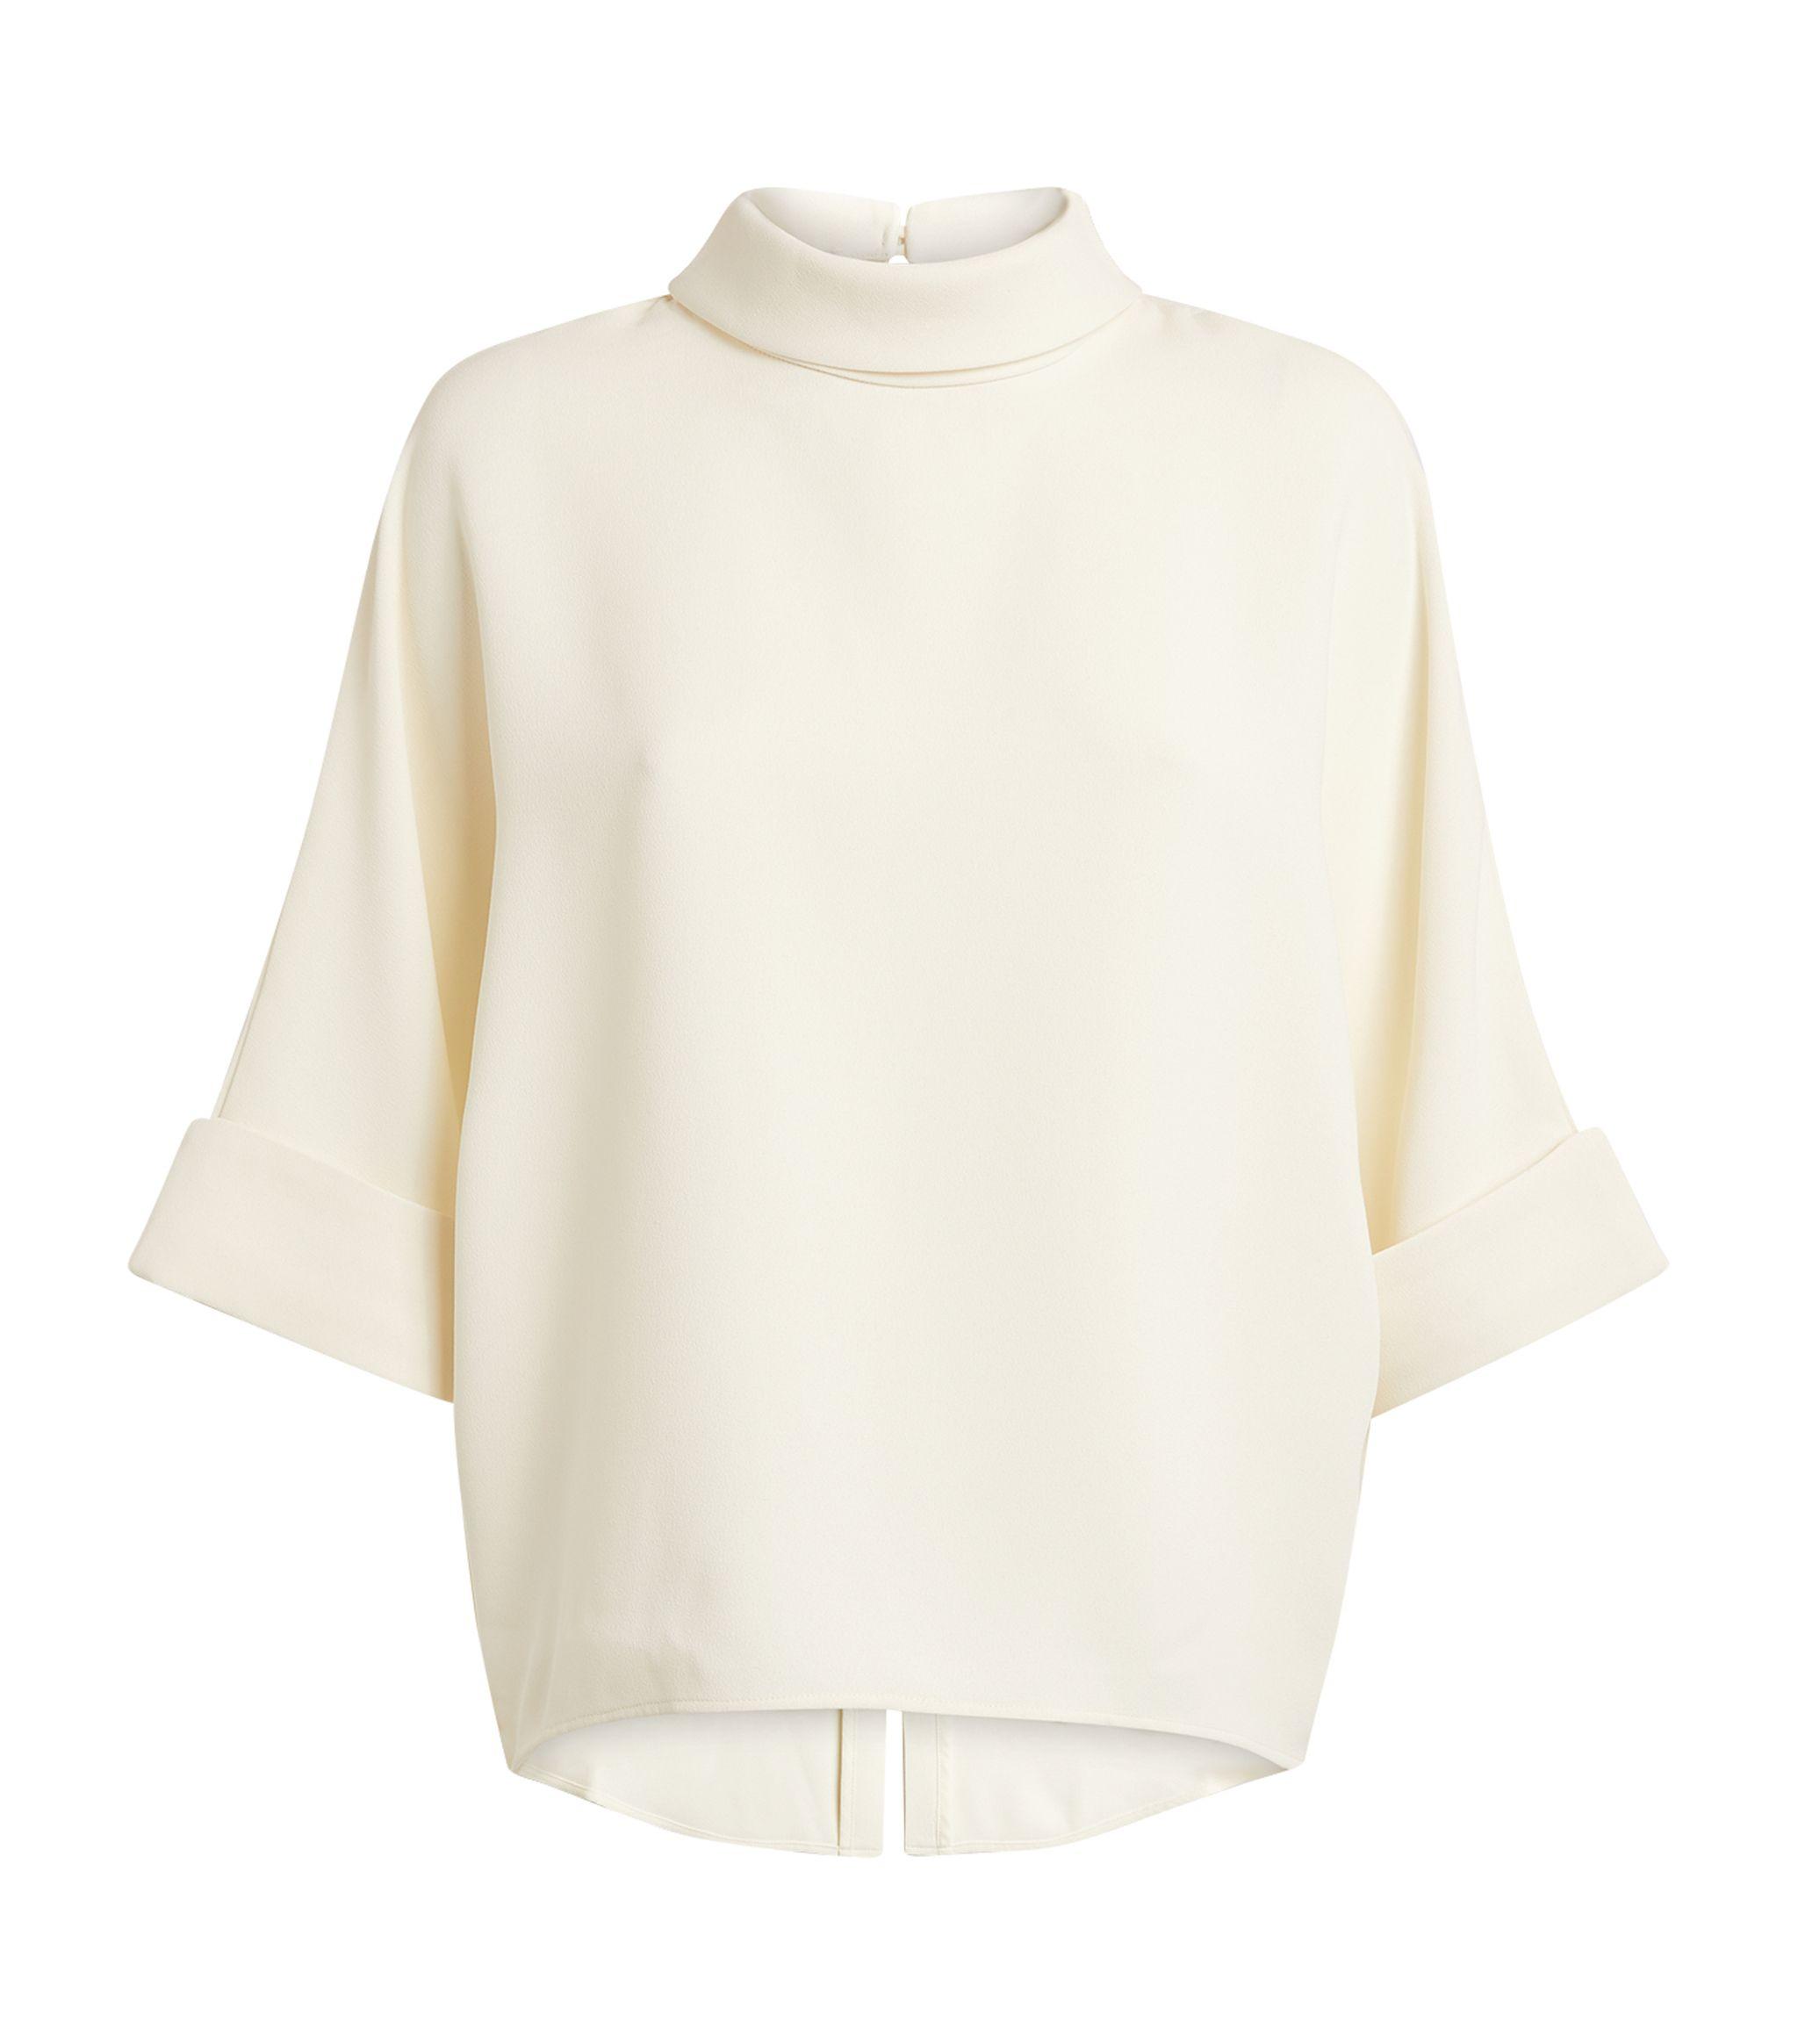 Mark Kenly Domino Tan Synthetic Open-back Bailee Blouse in White 